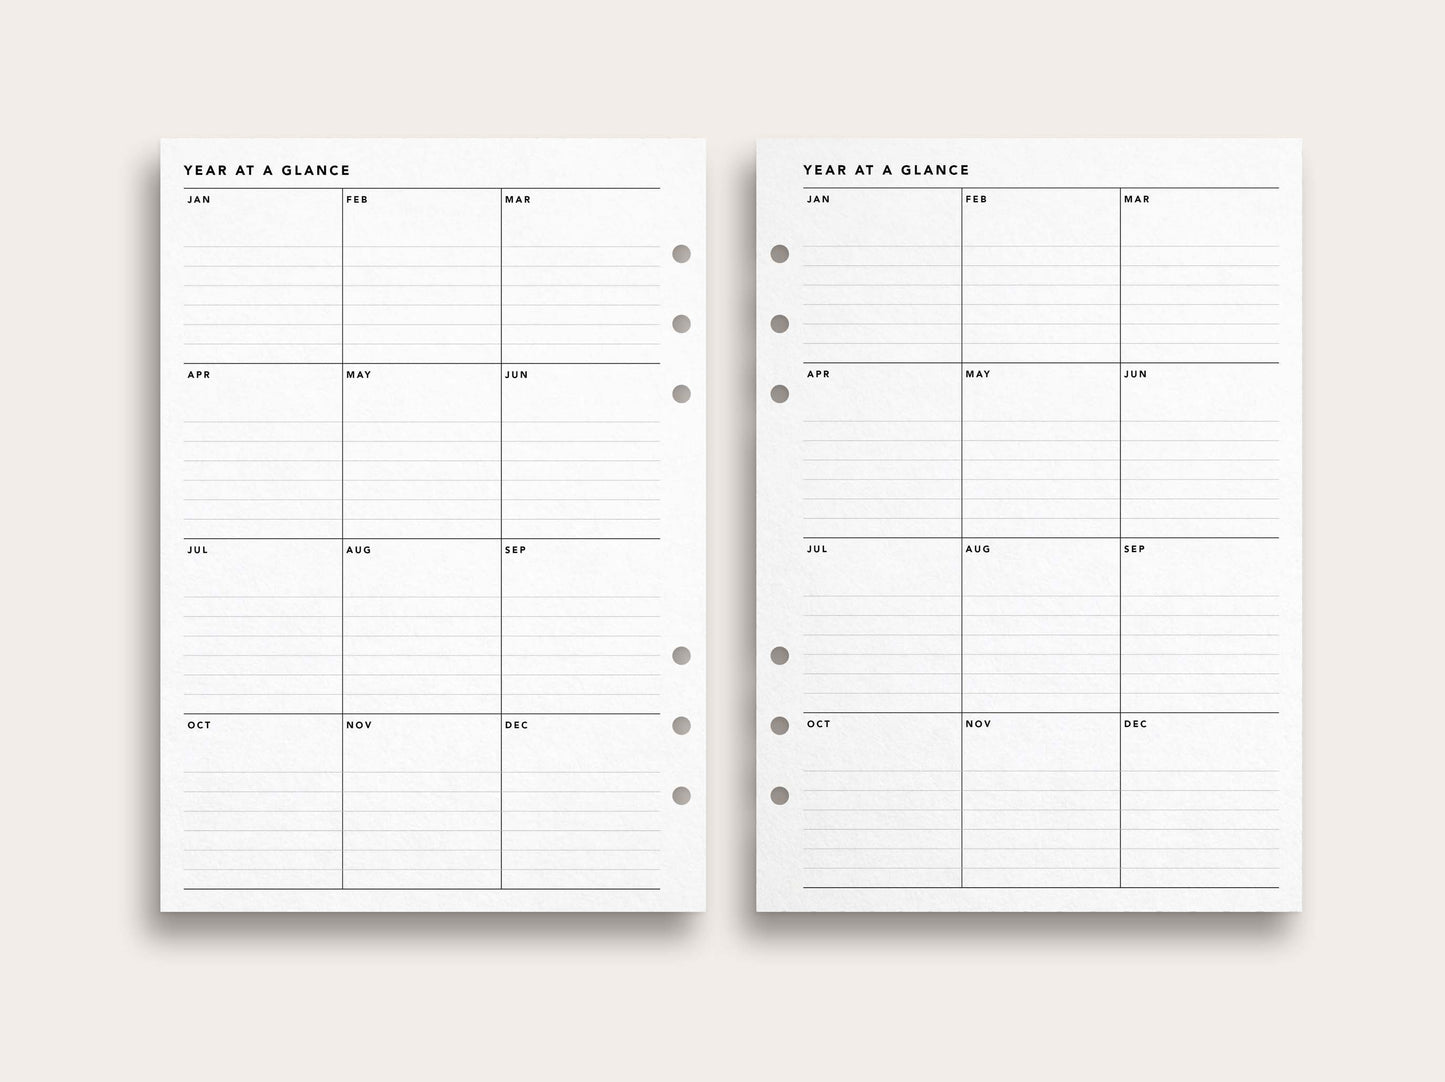 Yearly Planner No. 5 / Year at a Glance